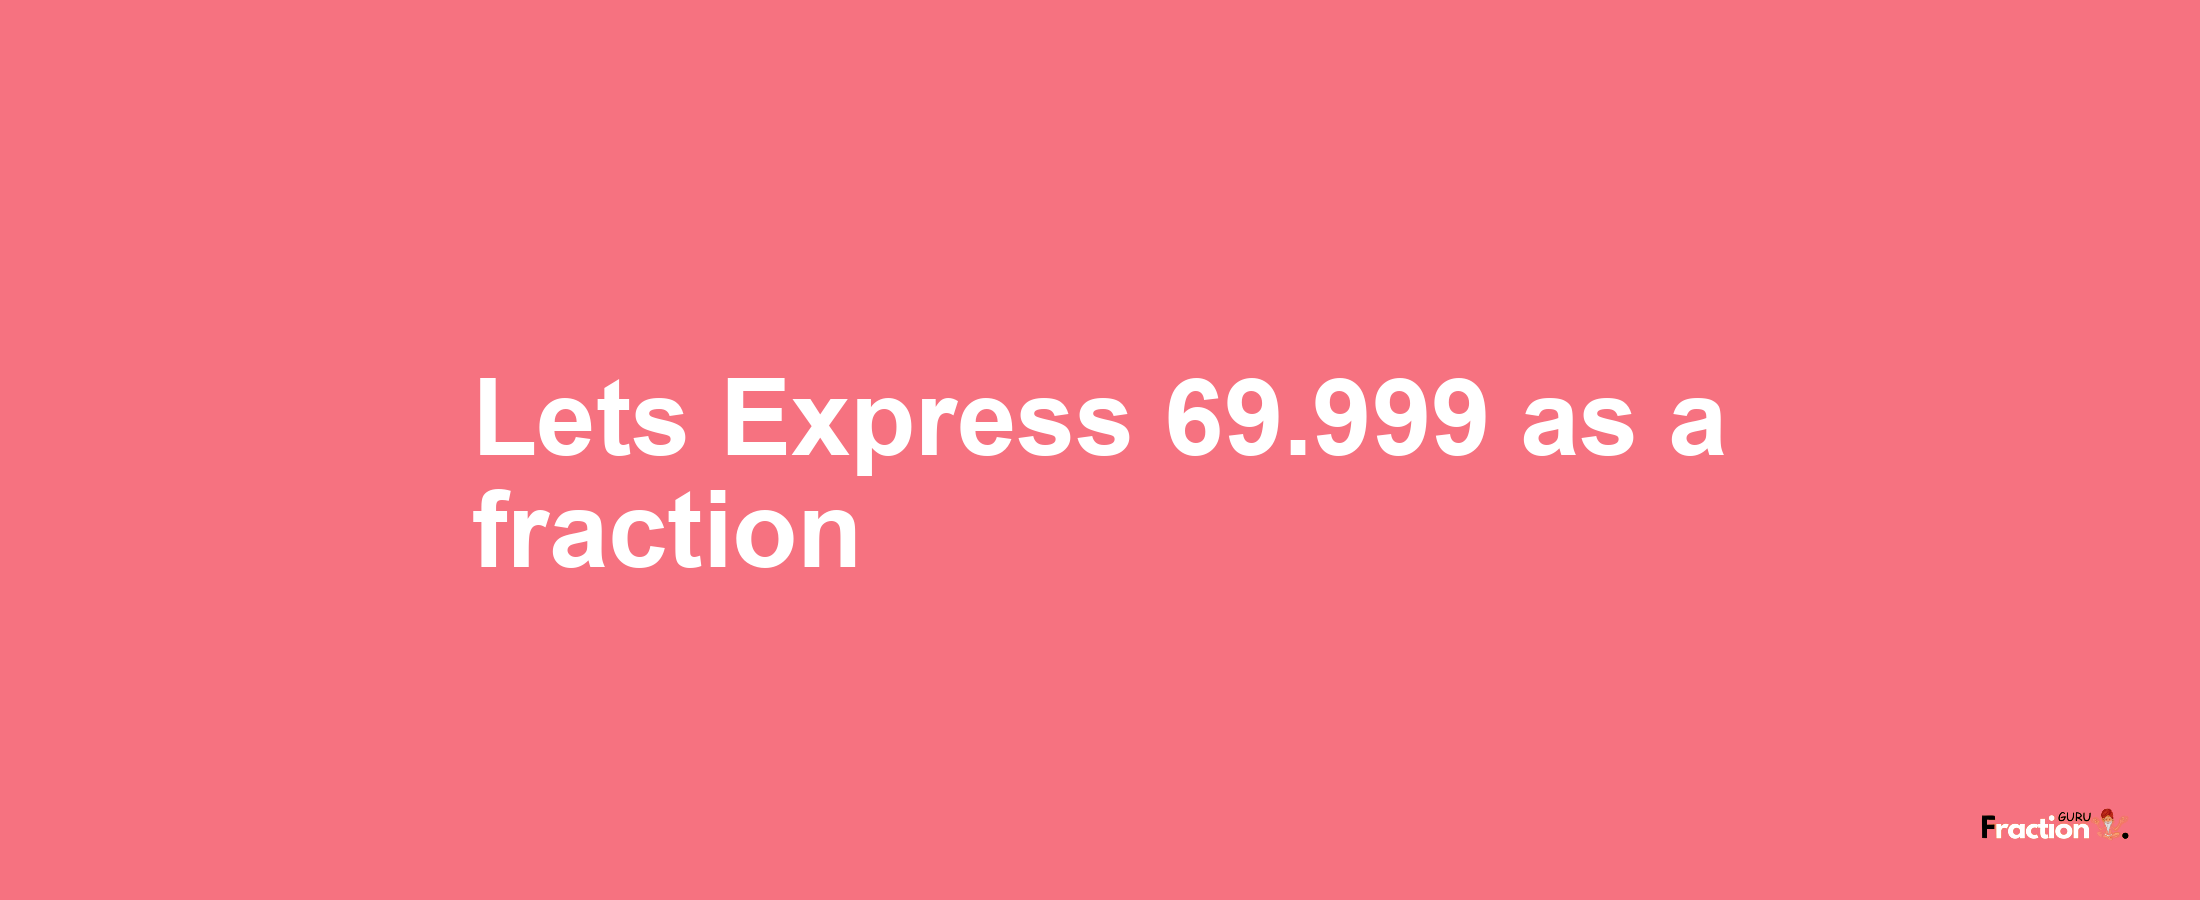 Lets Express 69.999 as afraction